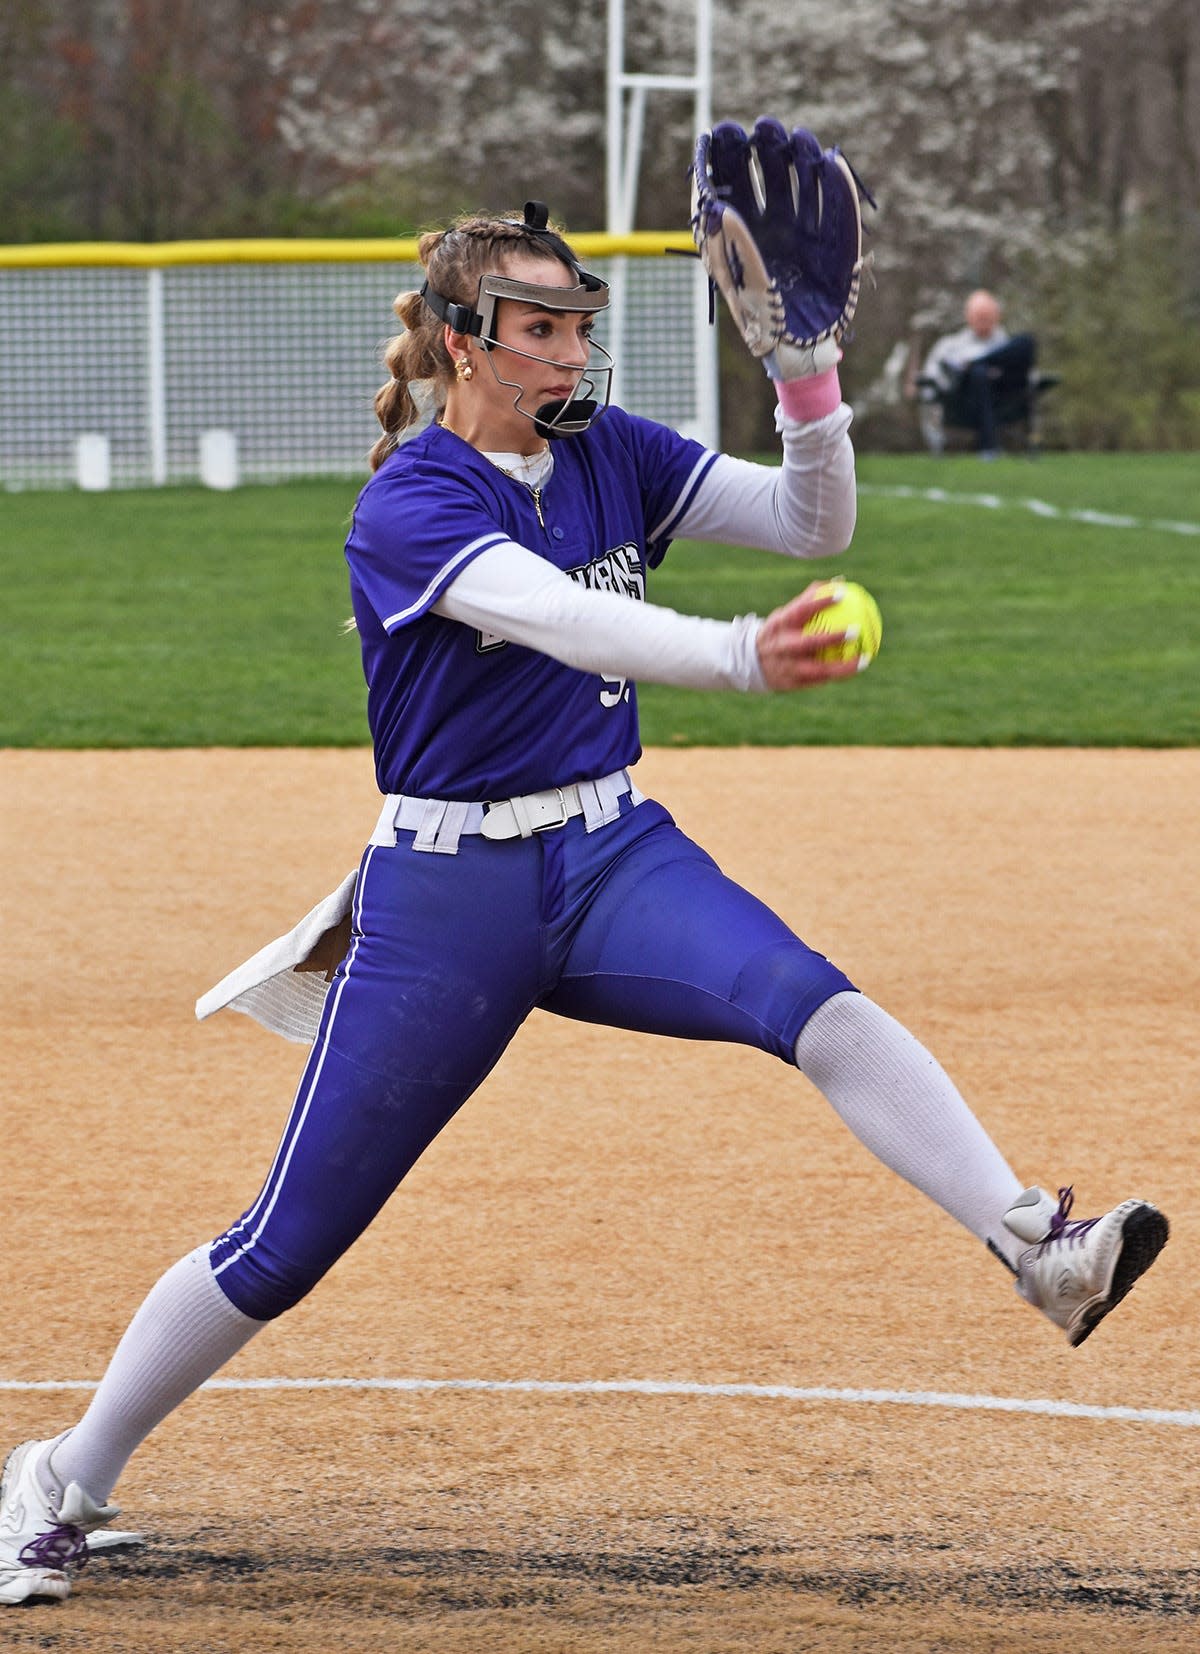 Wallenpaupack Area ace and reigning Tri-County Independent Athlete of the Week Gabby Hieber deals to the dish during Lackawanna League softball action versus West Scranton.